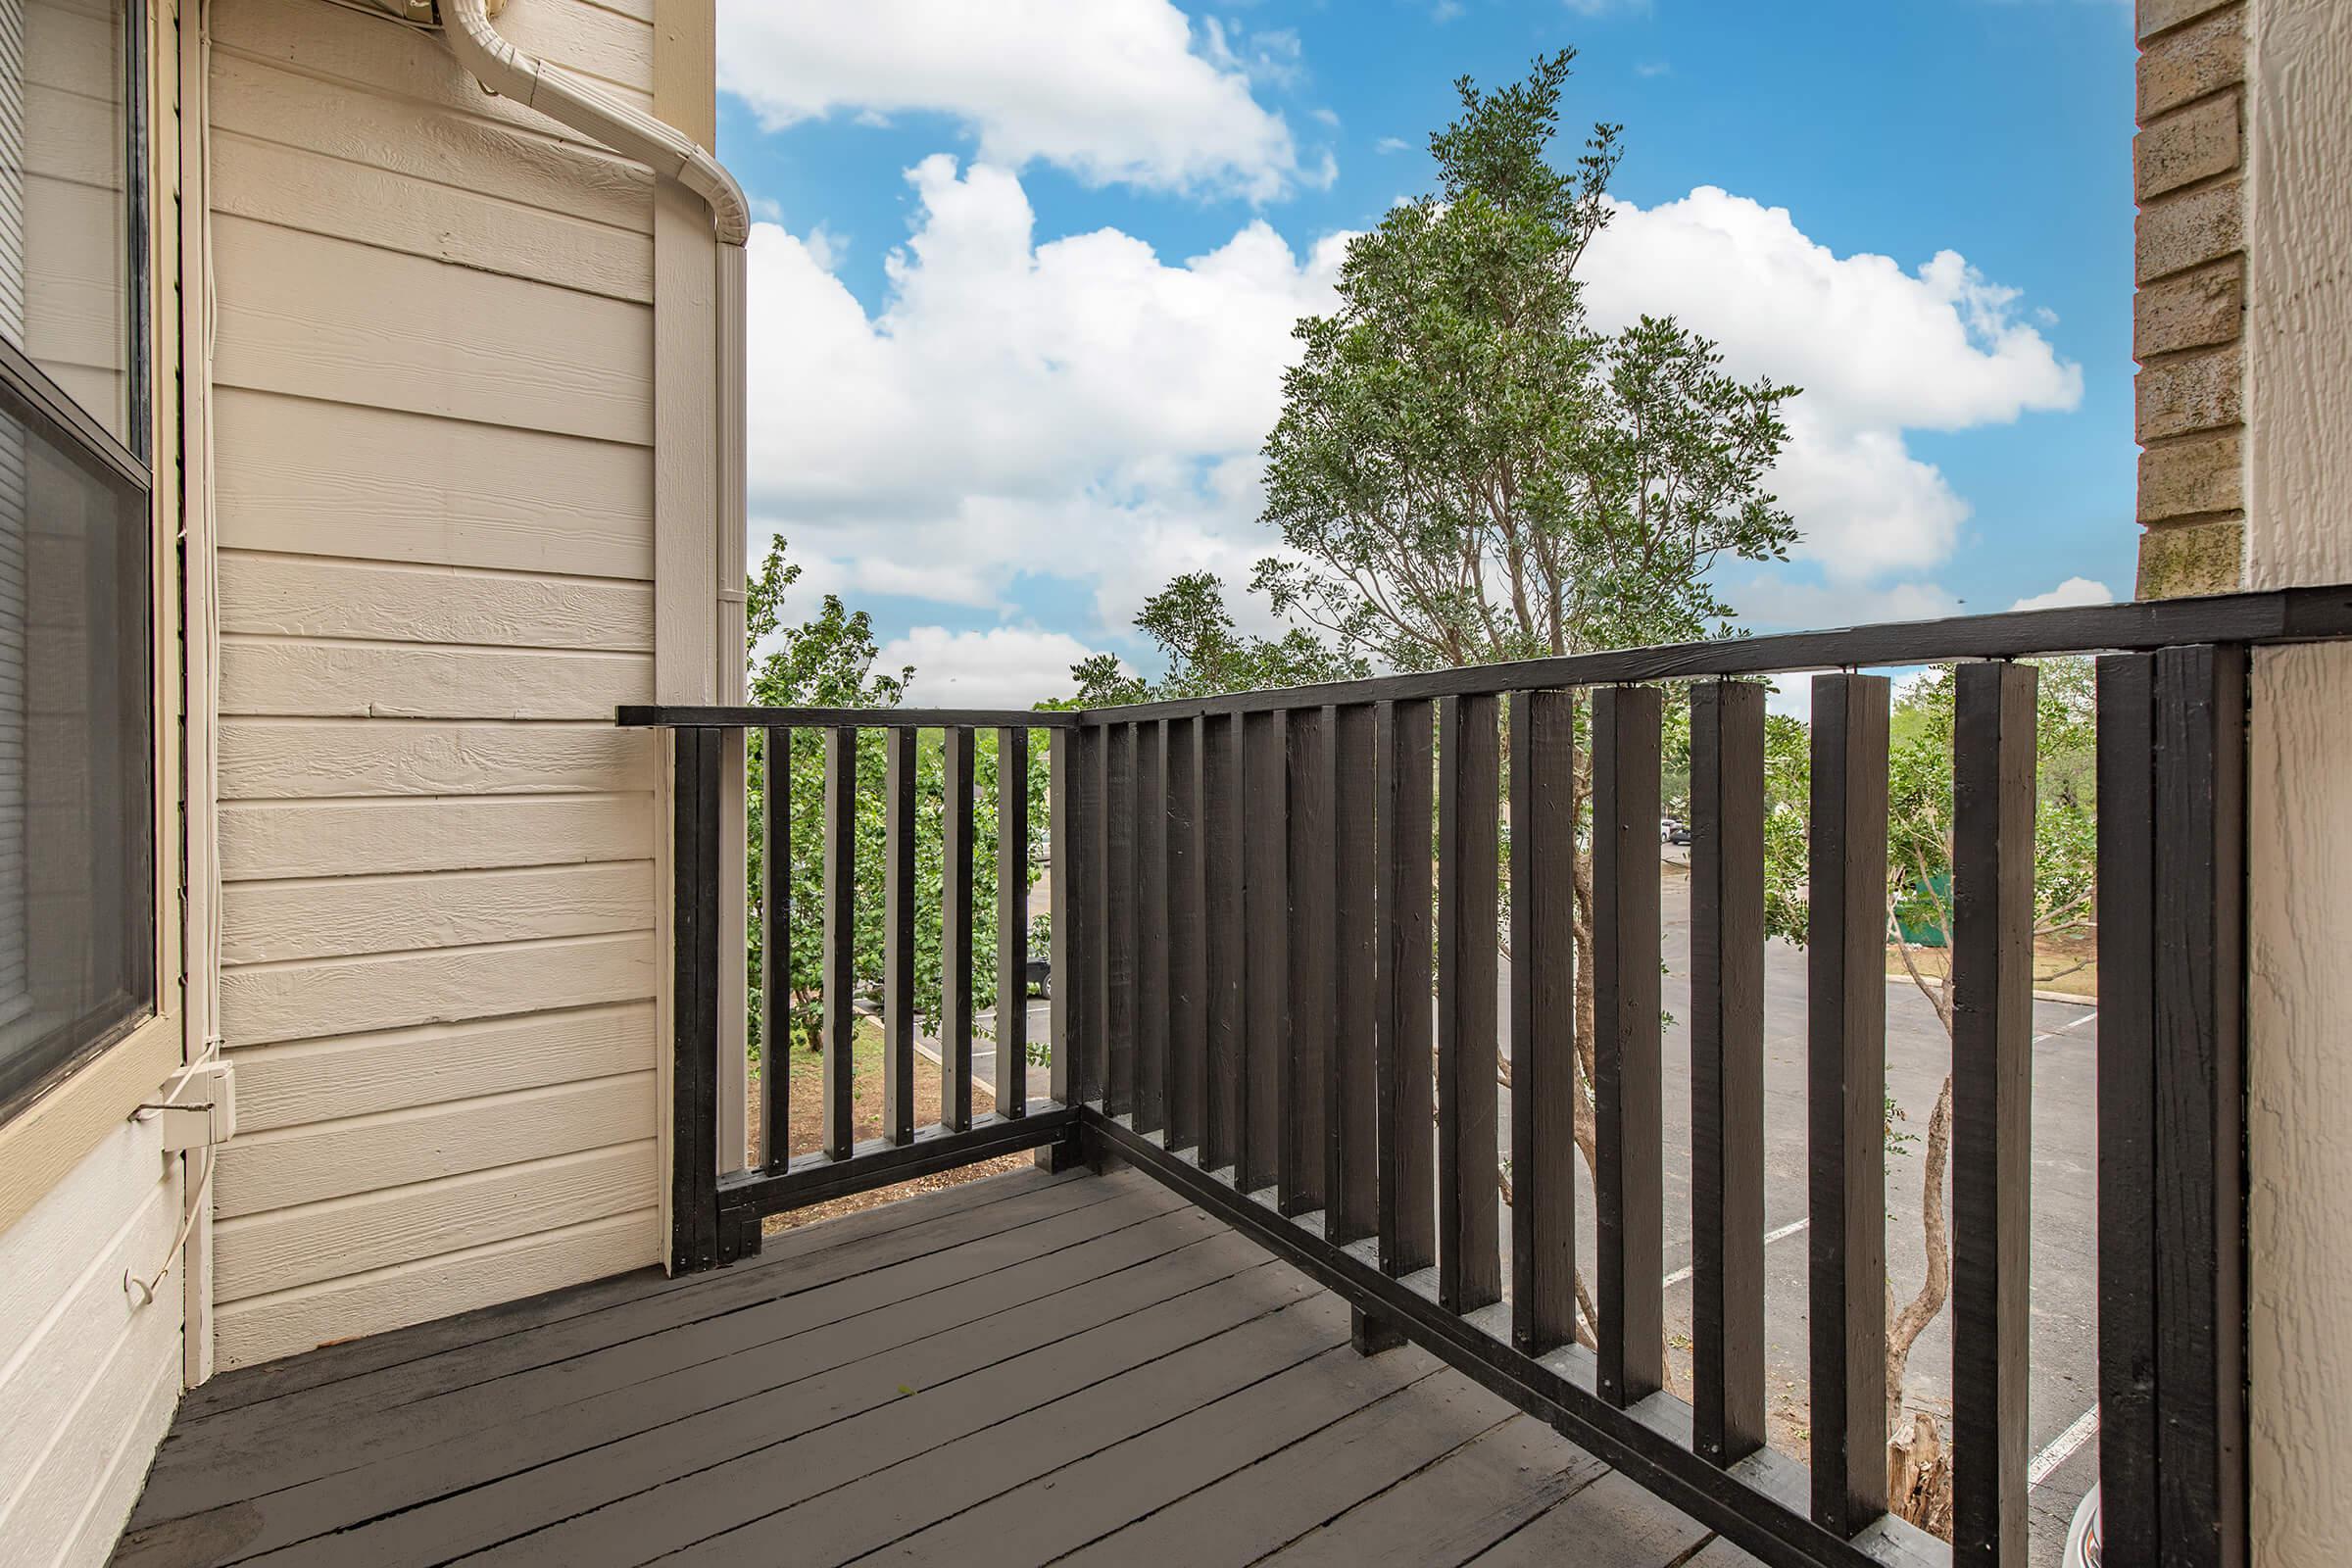 ENJOY THE VIEWS ON YOUR BALCONY OR PATIO